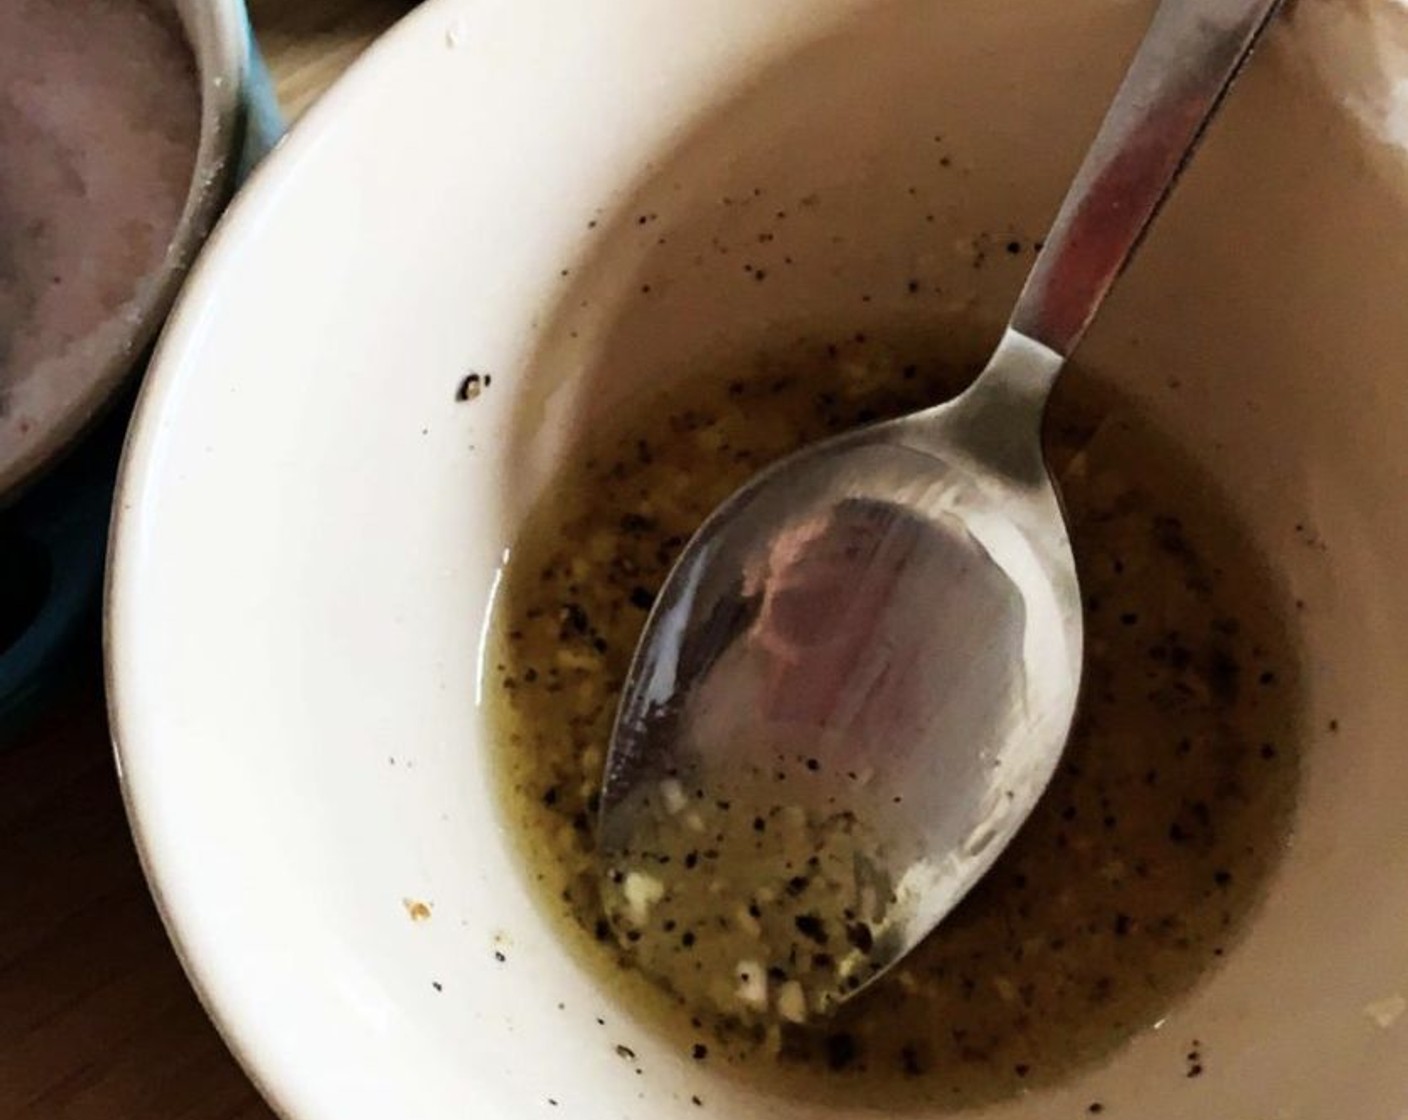 step 3 In a small bowl, combine Extra-Virgin Olive Oil (2 Tbsp), Garlic (2 cloves), Himalayan Rock Salt (1/2 tsp), Ground Black Pepper (1/4 tsp), and Coconut Vinegar (2 Tbsp). Stir them well and pour them on top of the salad.